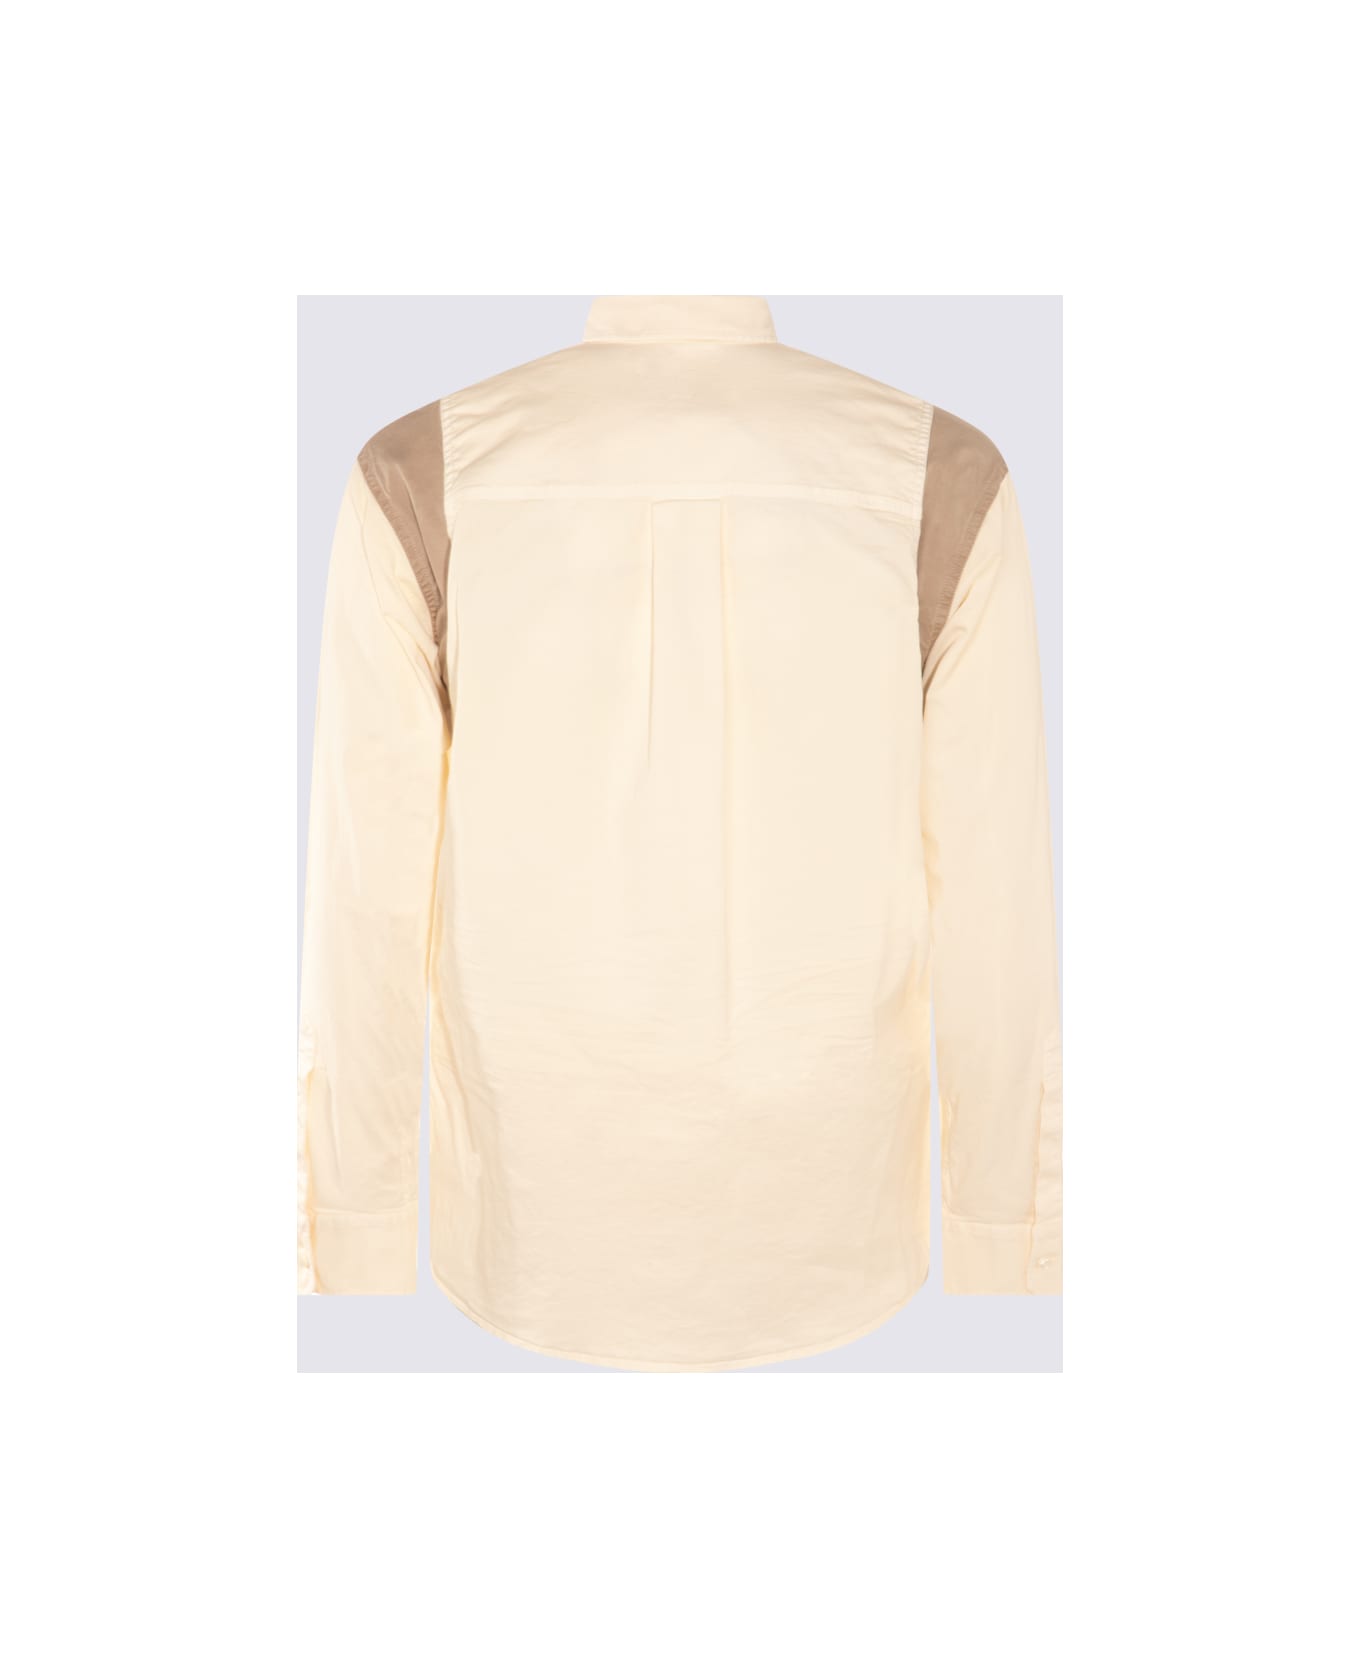 Dsquared2 Cream And Beige Cotton Blend Shirt - 0ff-White